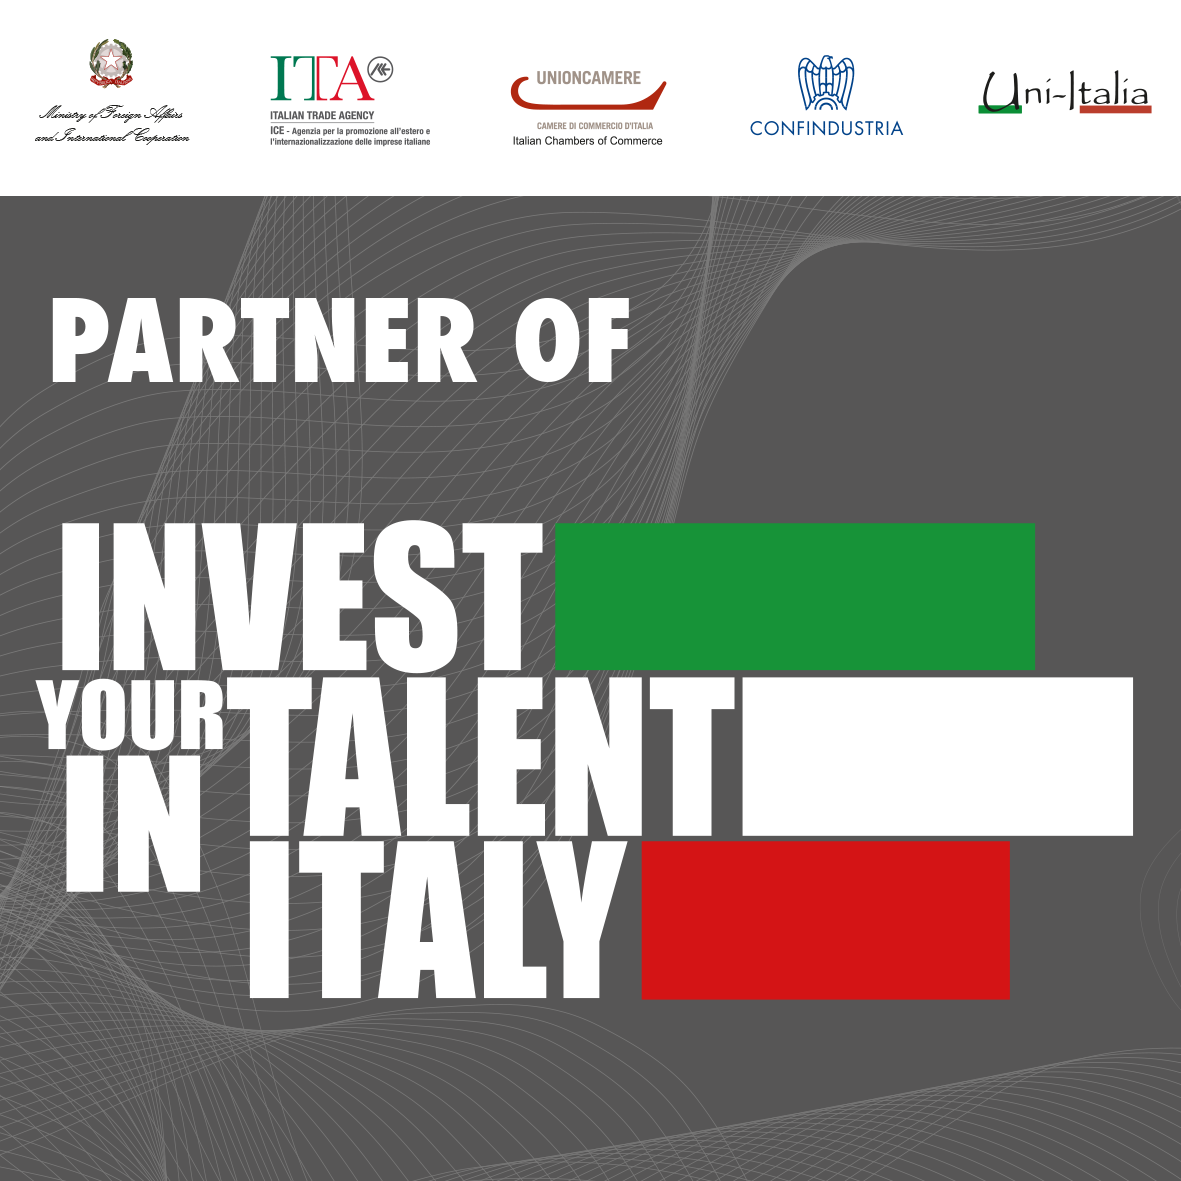 Invest your talent in itlay